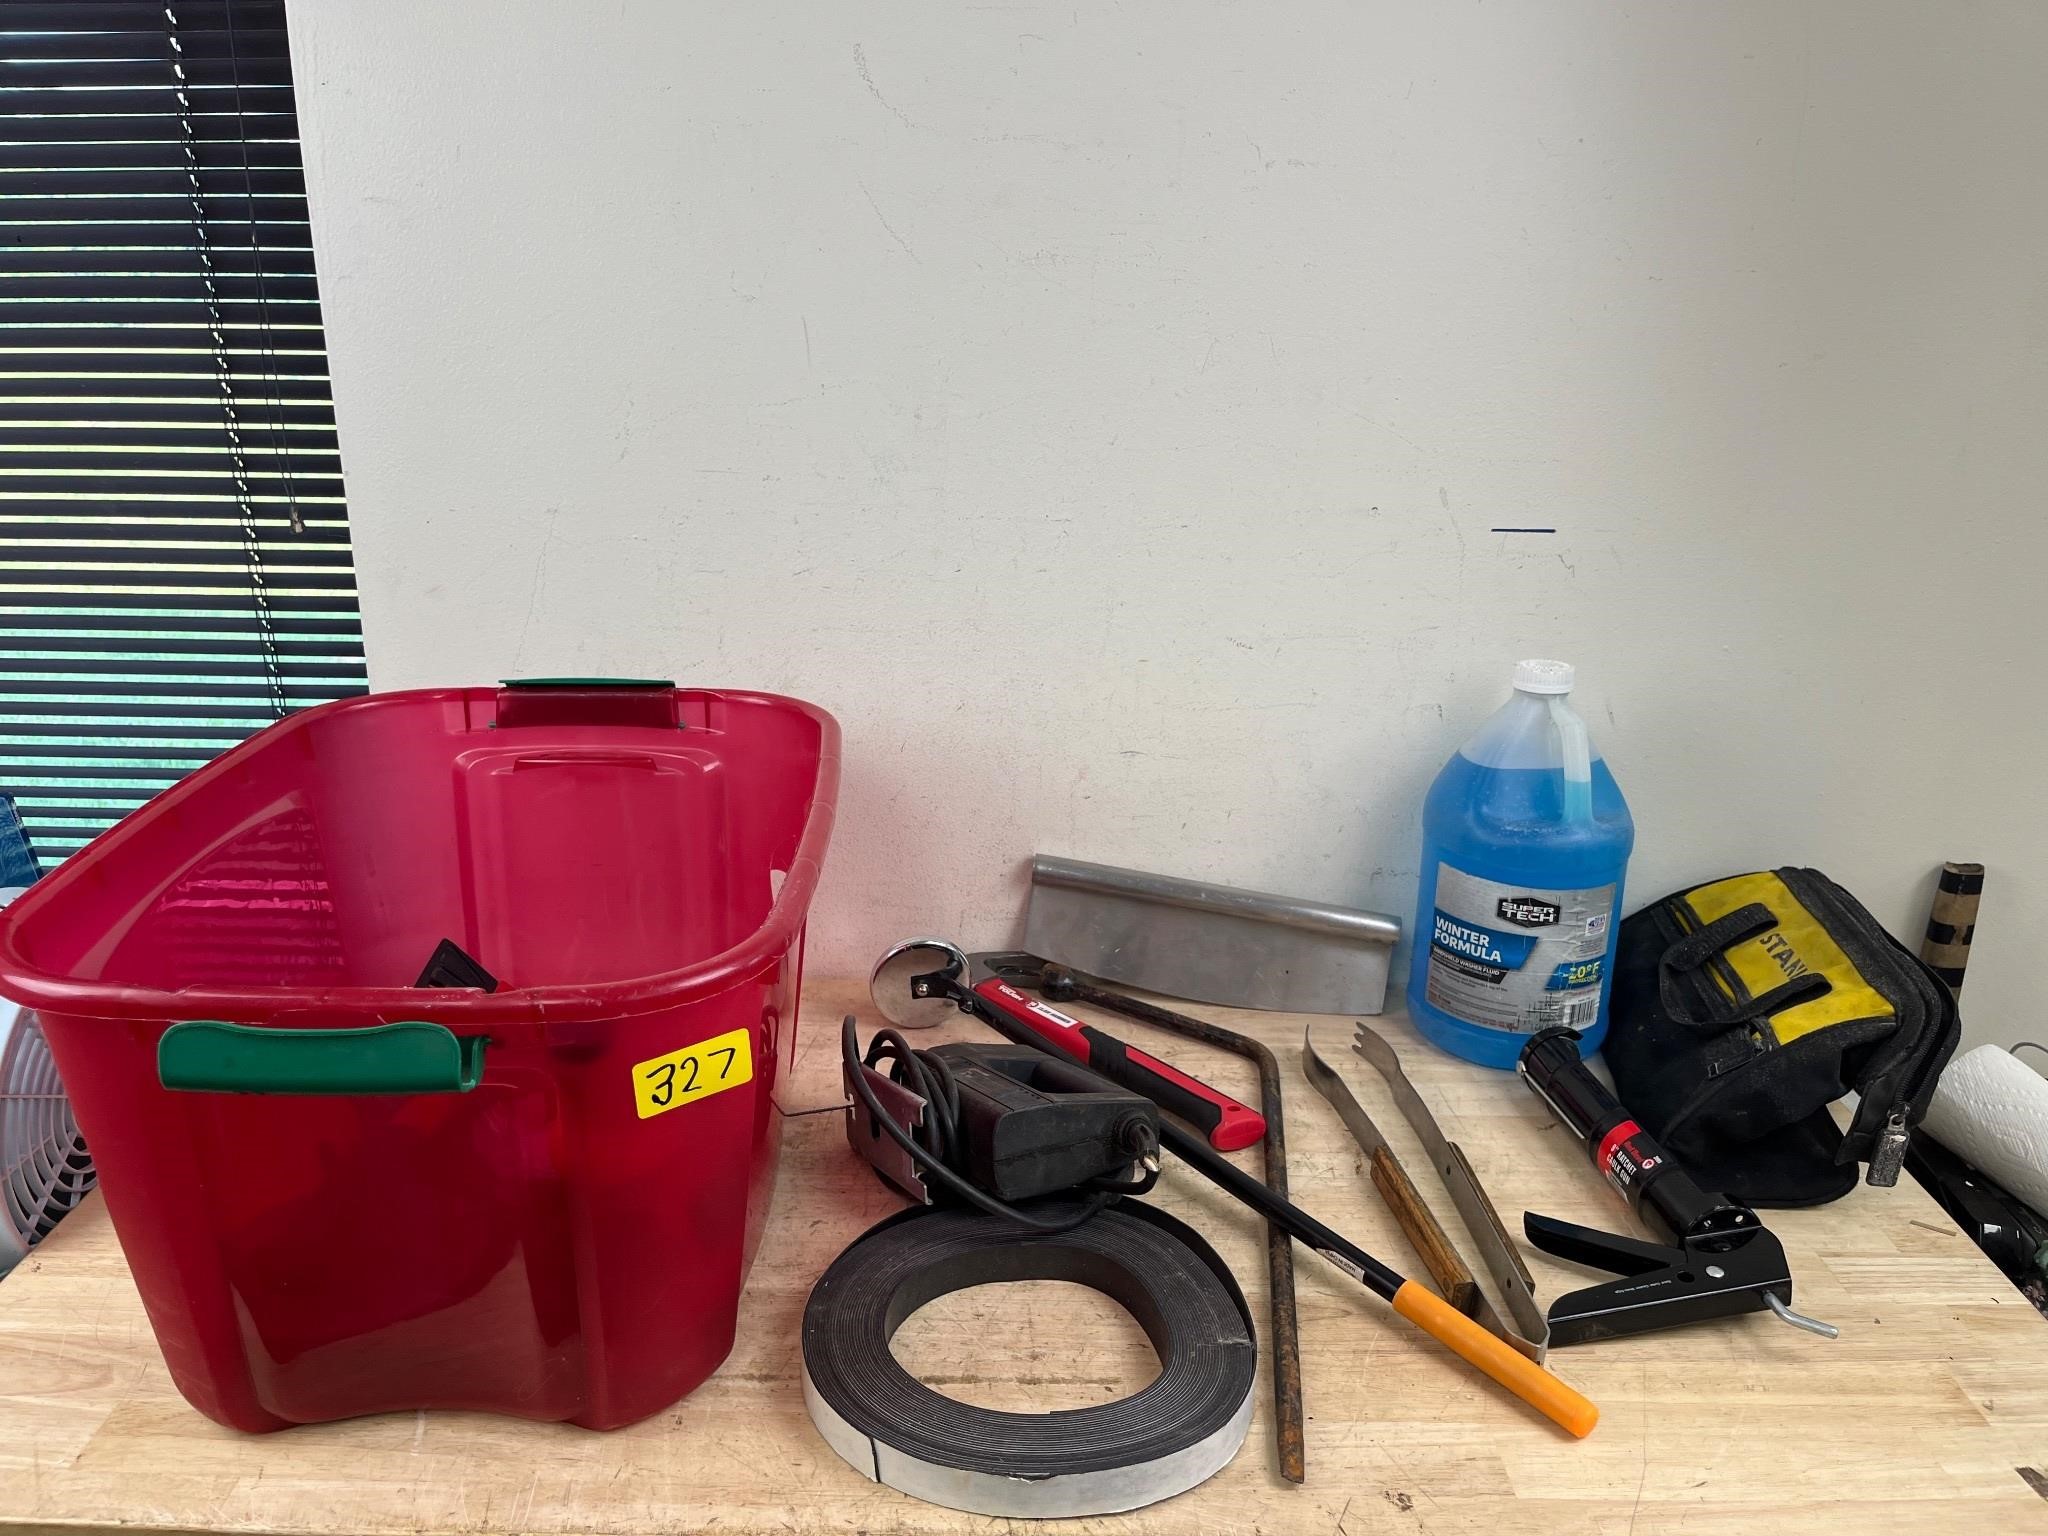 Tools lot with Tote